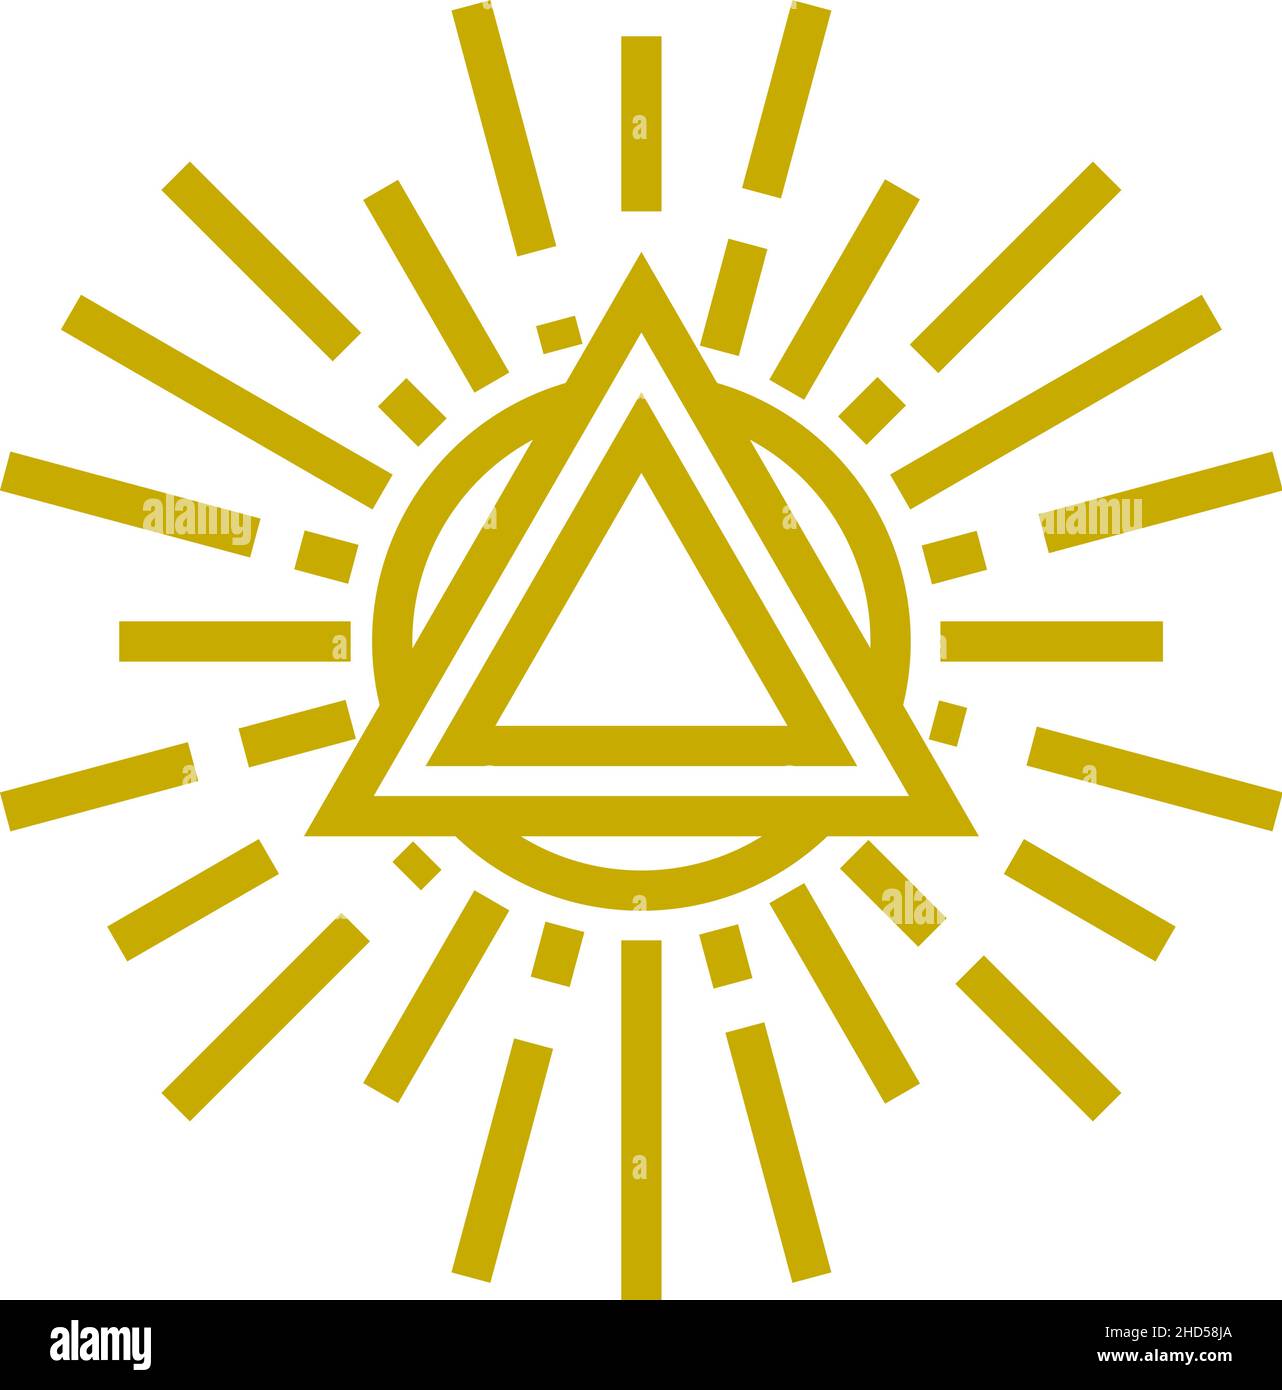 Triangle on shining sun. Decorative symbol in vintage style Stock Vector